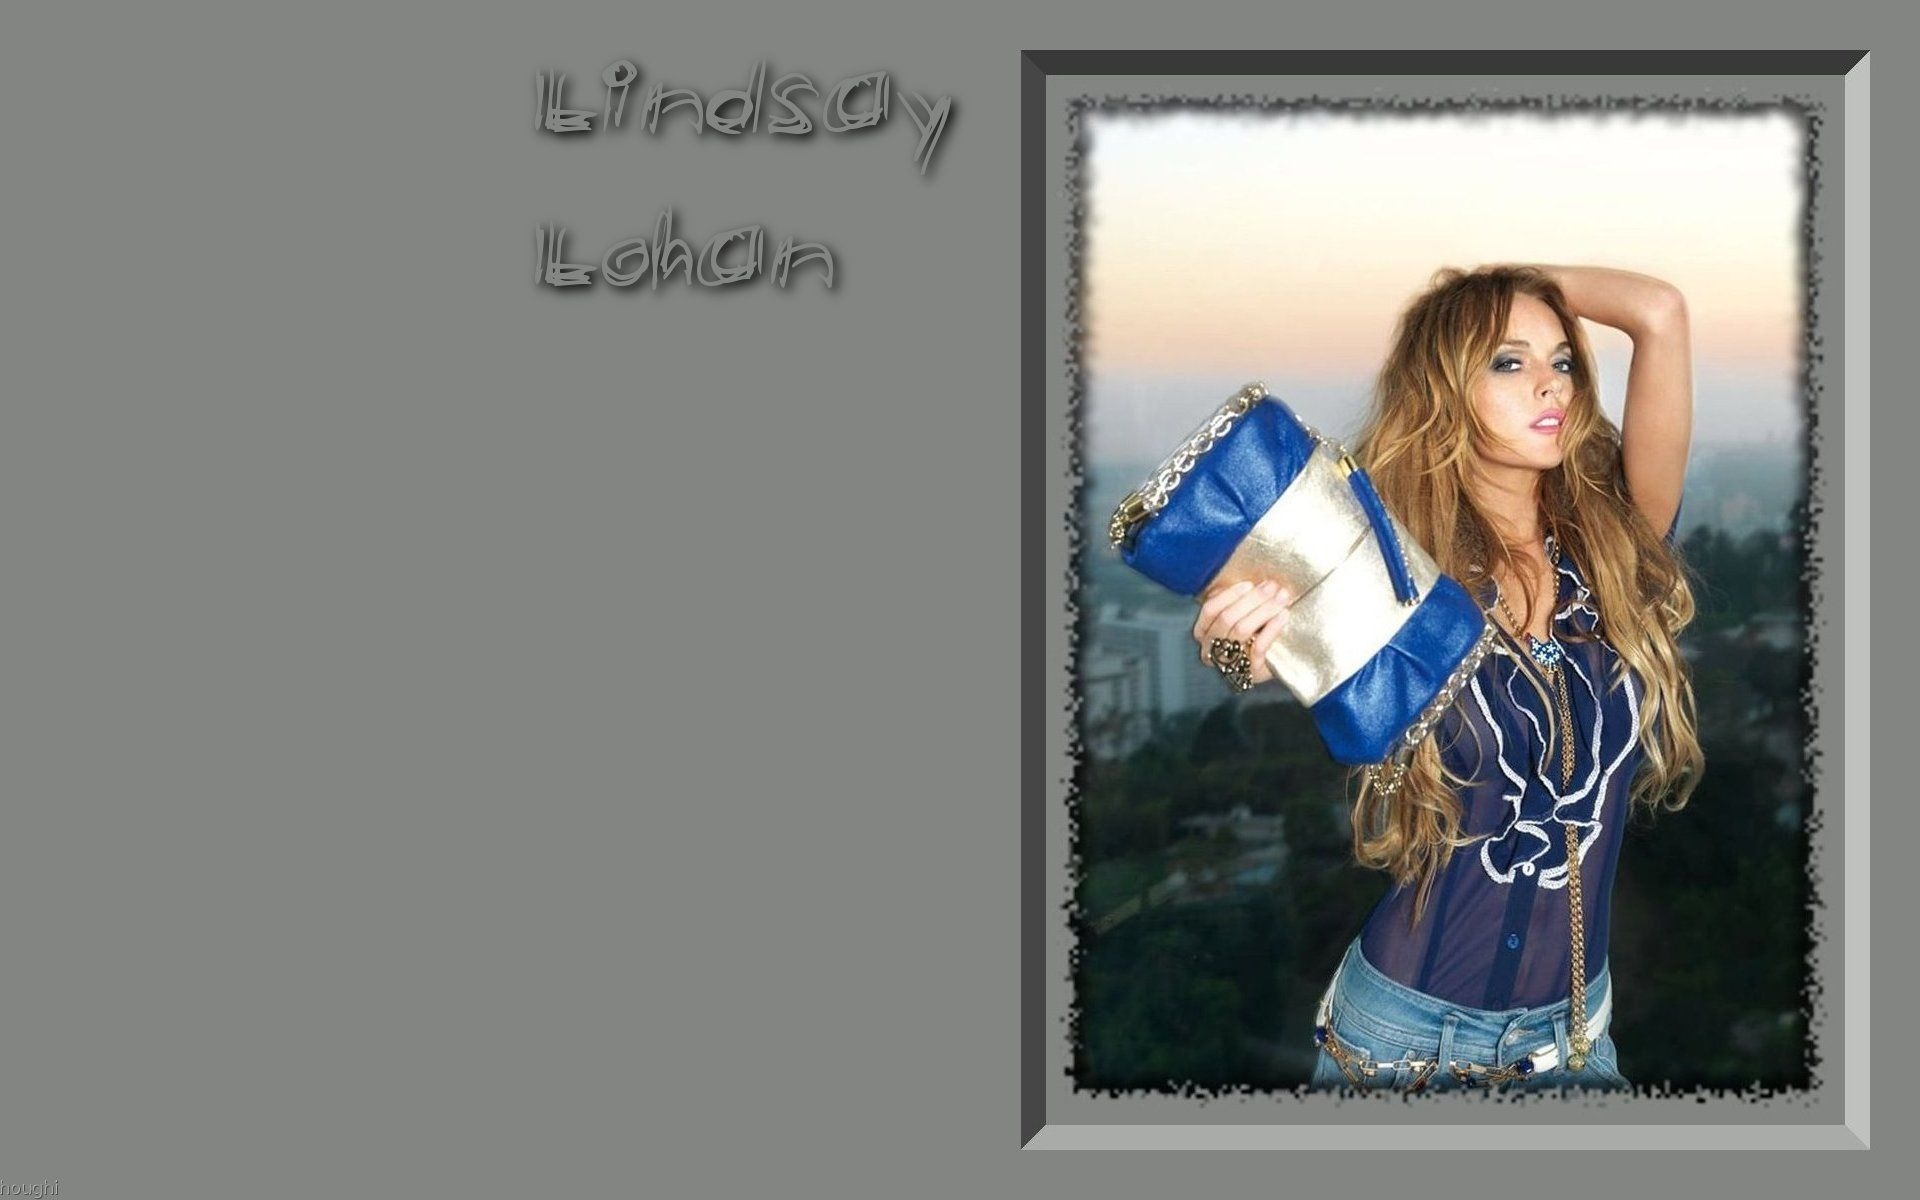 Lindsay Lohan #018 - 1920x1200 Wallpapers Pictures Photos Images